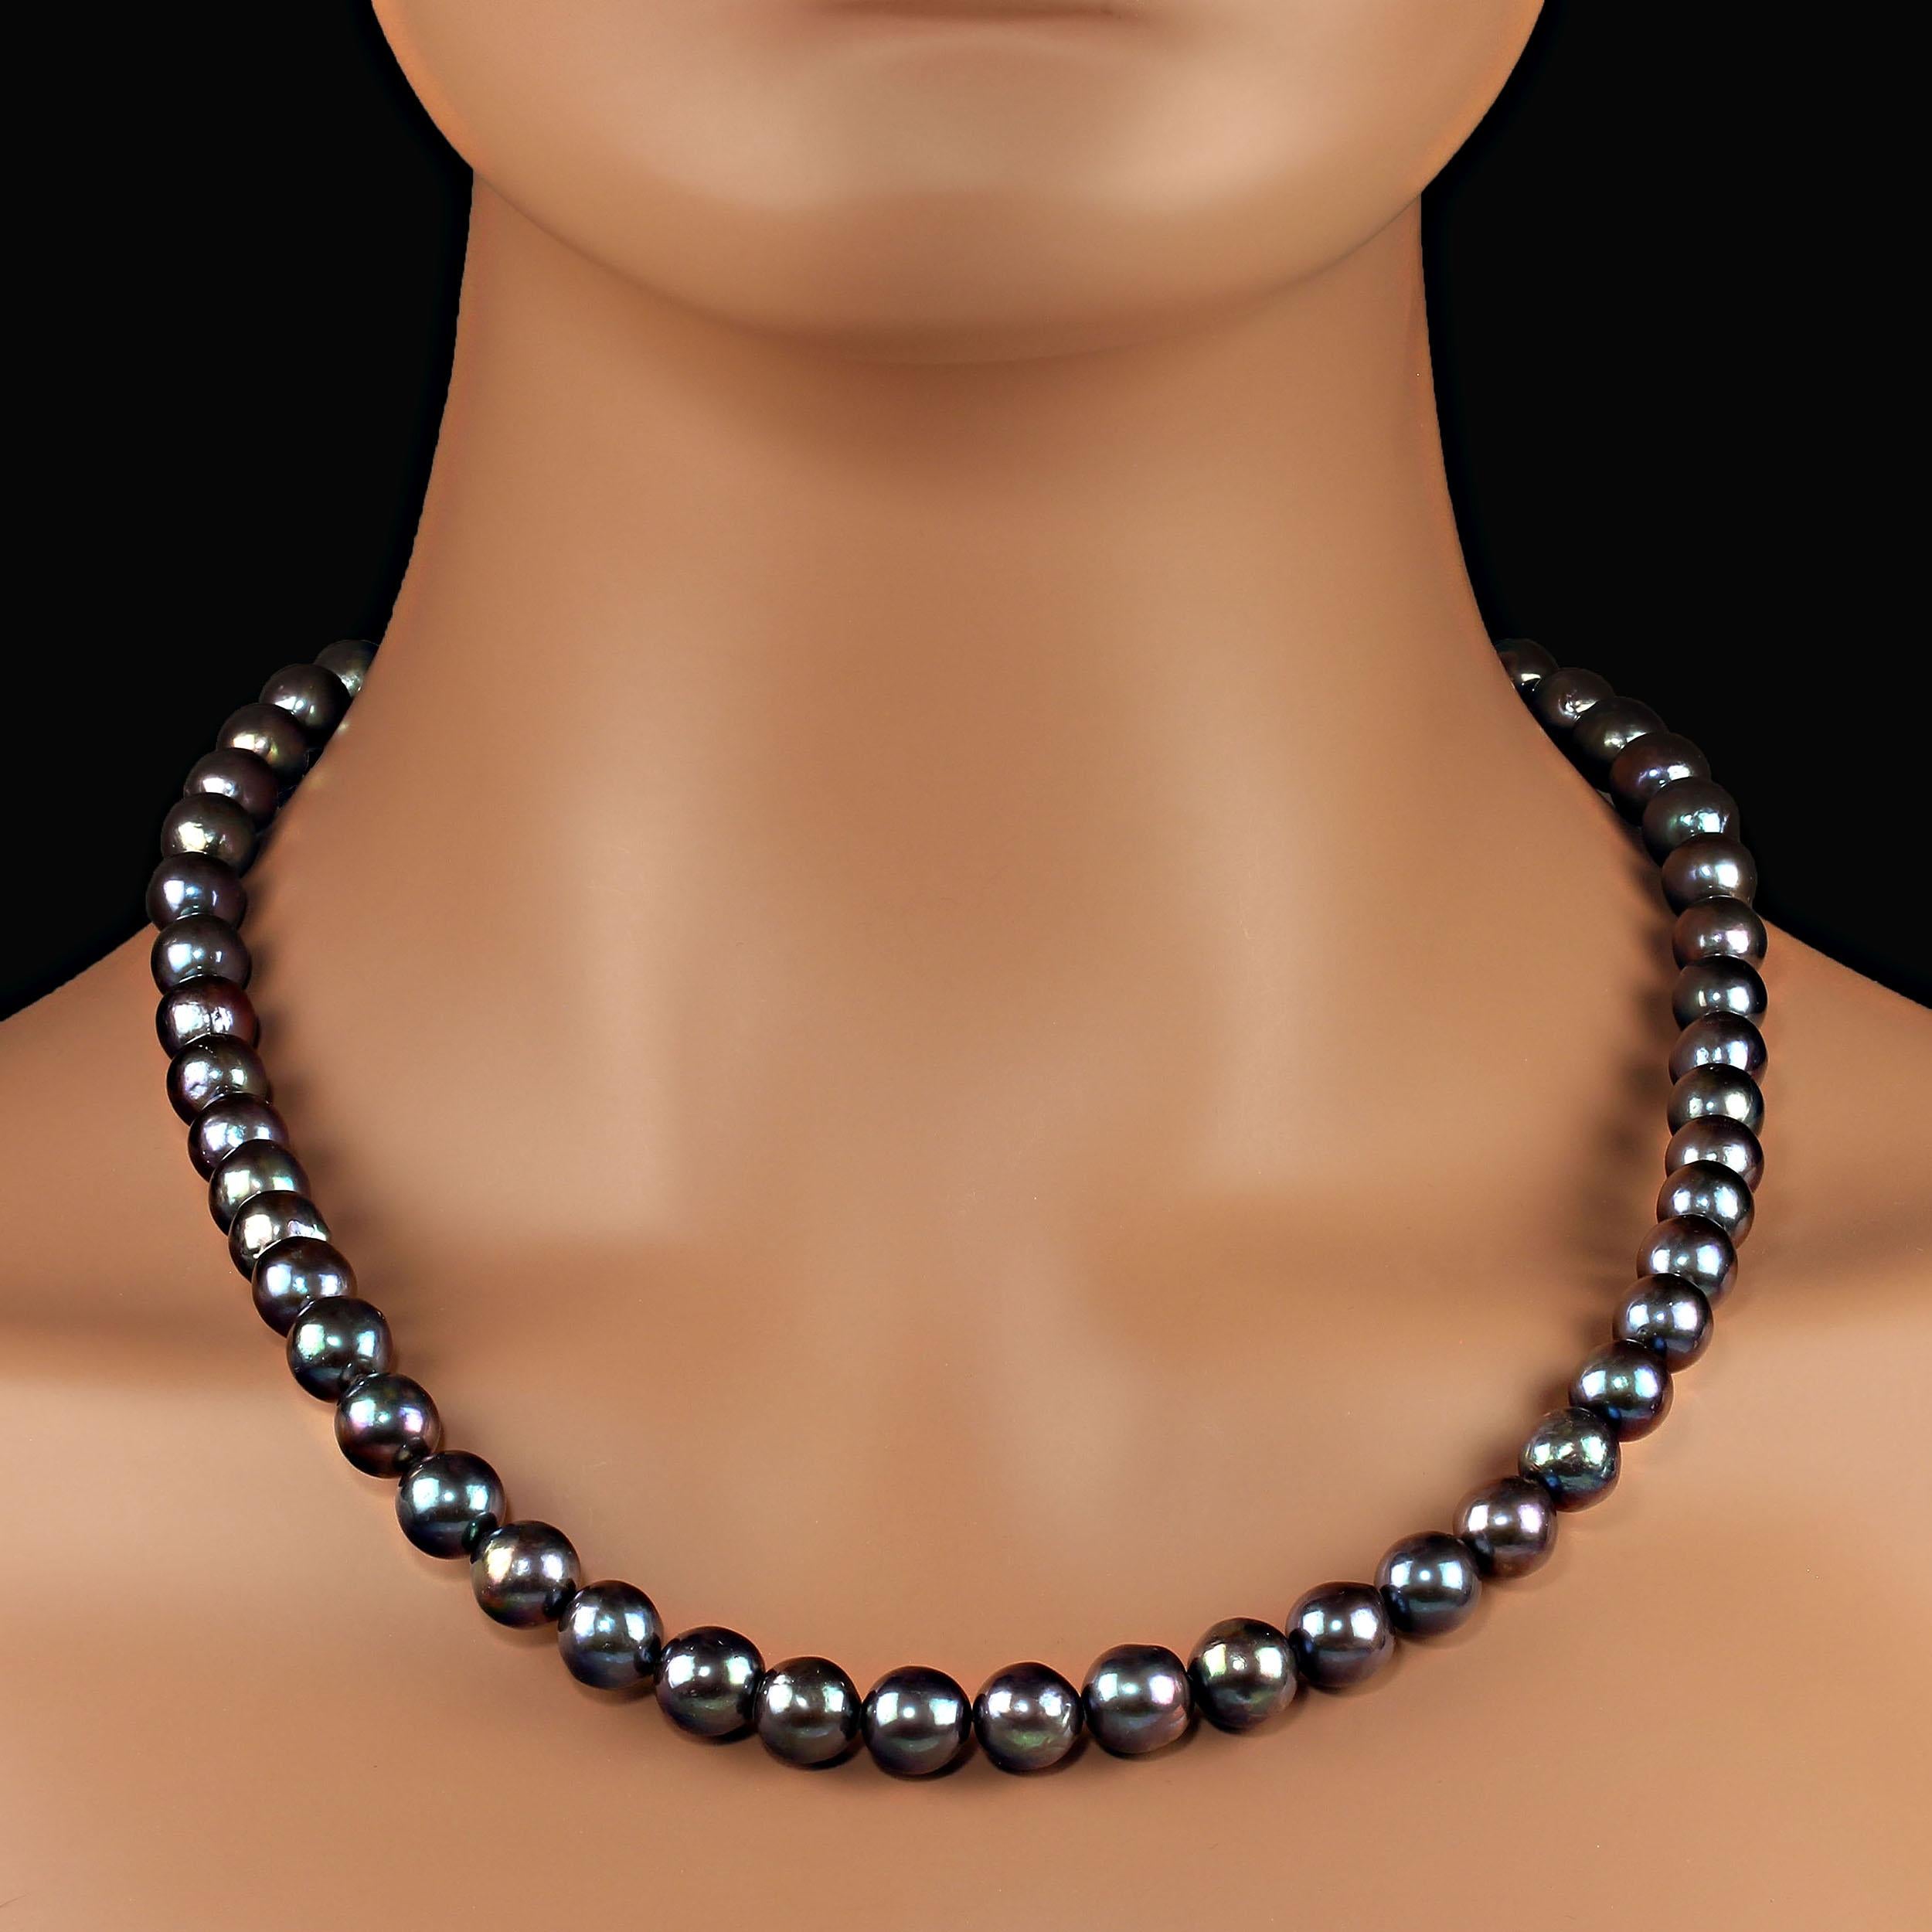 10MM Blue/Green Iridescent Pearl necklace with flashes of purple.  This 21-inch gorgeous pearl necklace is a delight to wear.  The necklace features a lobster claw clasp of antique sterling silver with diamond chips. MN2368
See the video for the